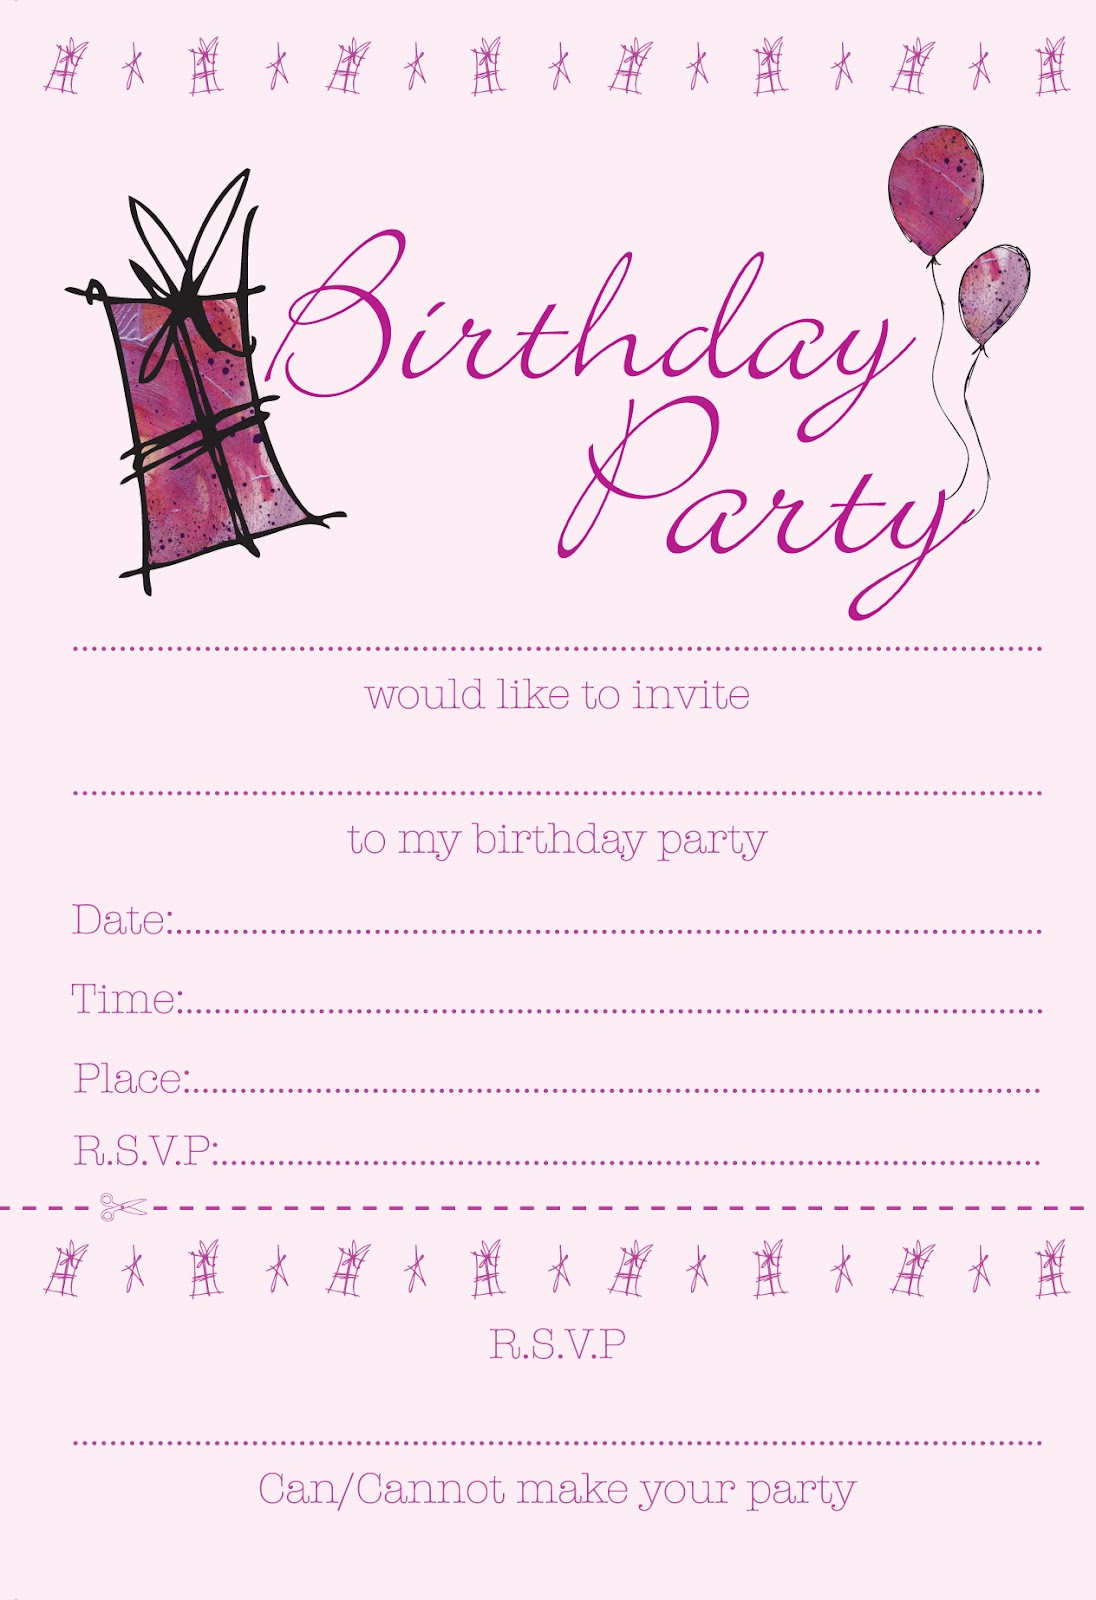 13th-birthday-party-invitation-templates-business-template-ideas